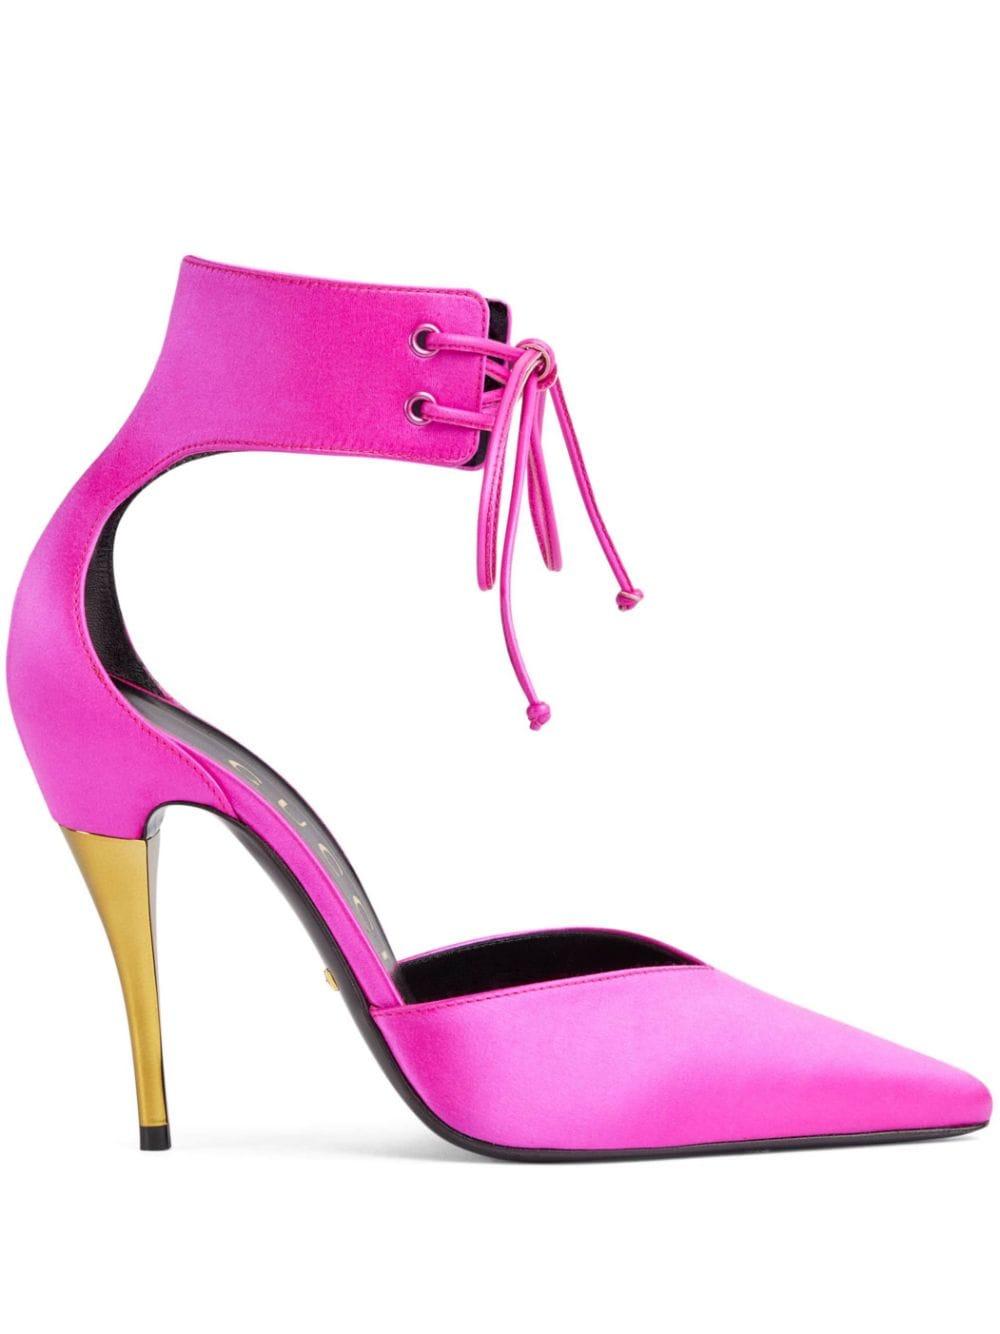 Gucci Ankle-cuff Satin Pumps in Pink | Lyst